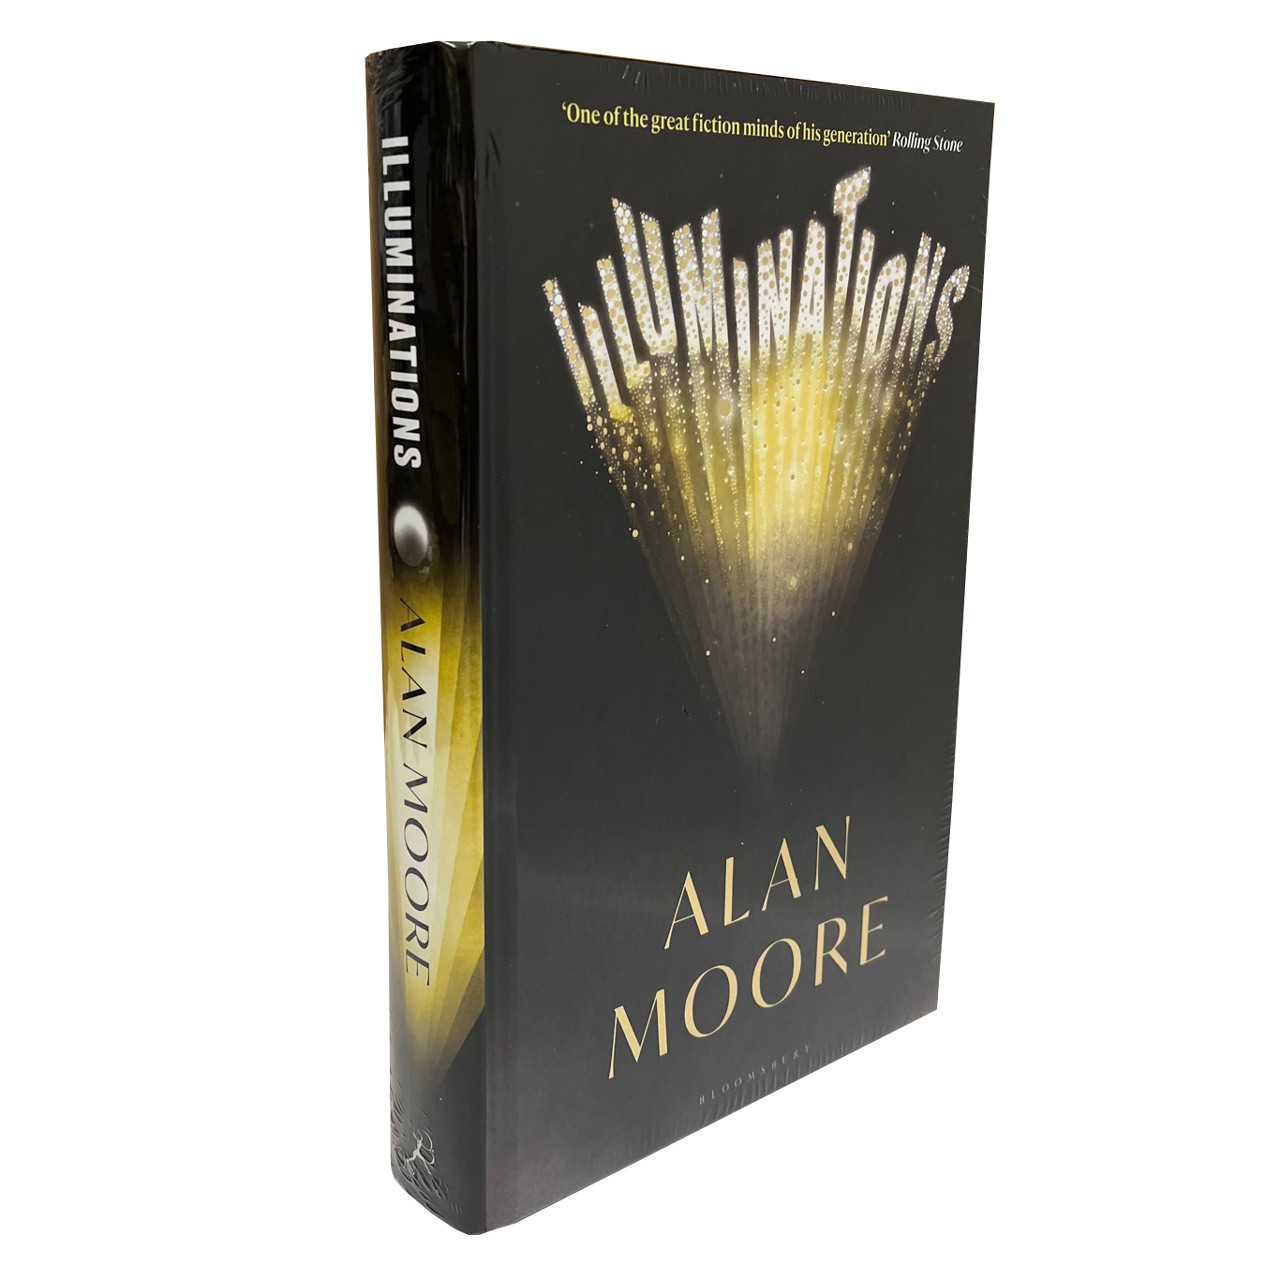 Alan Moore "Illuminations" UK Signed Limited First Edition, Exclusive Signed Collector's Edition of 1,000 [Sealed]